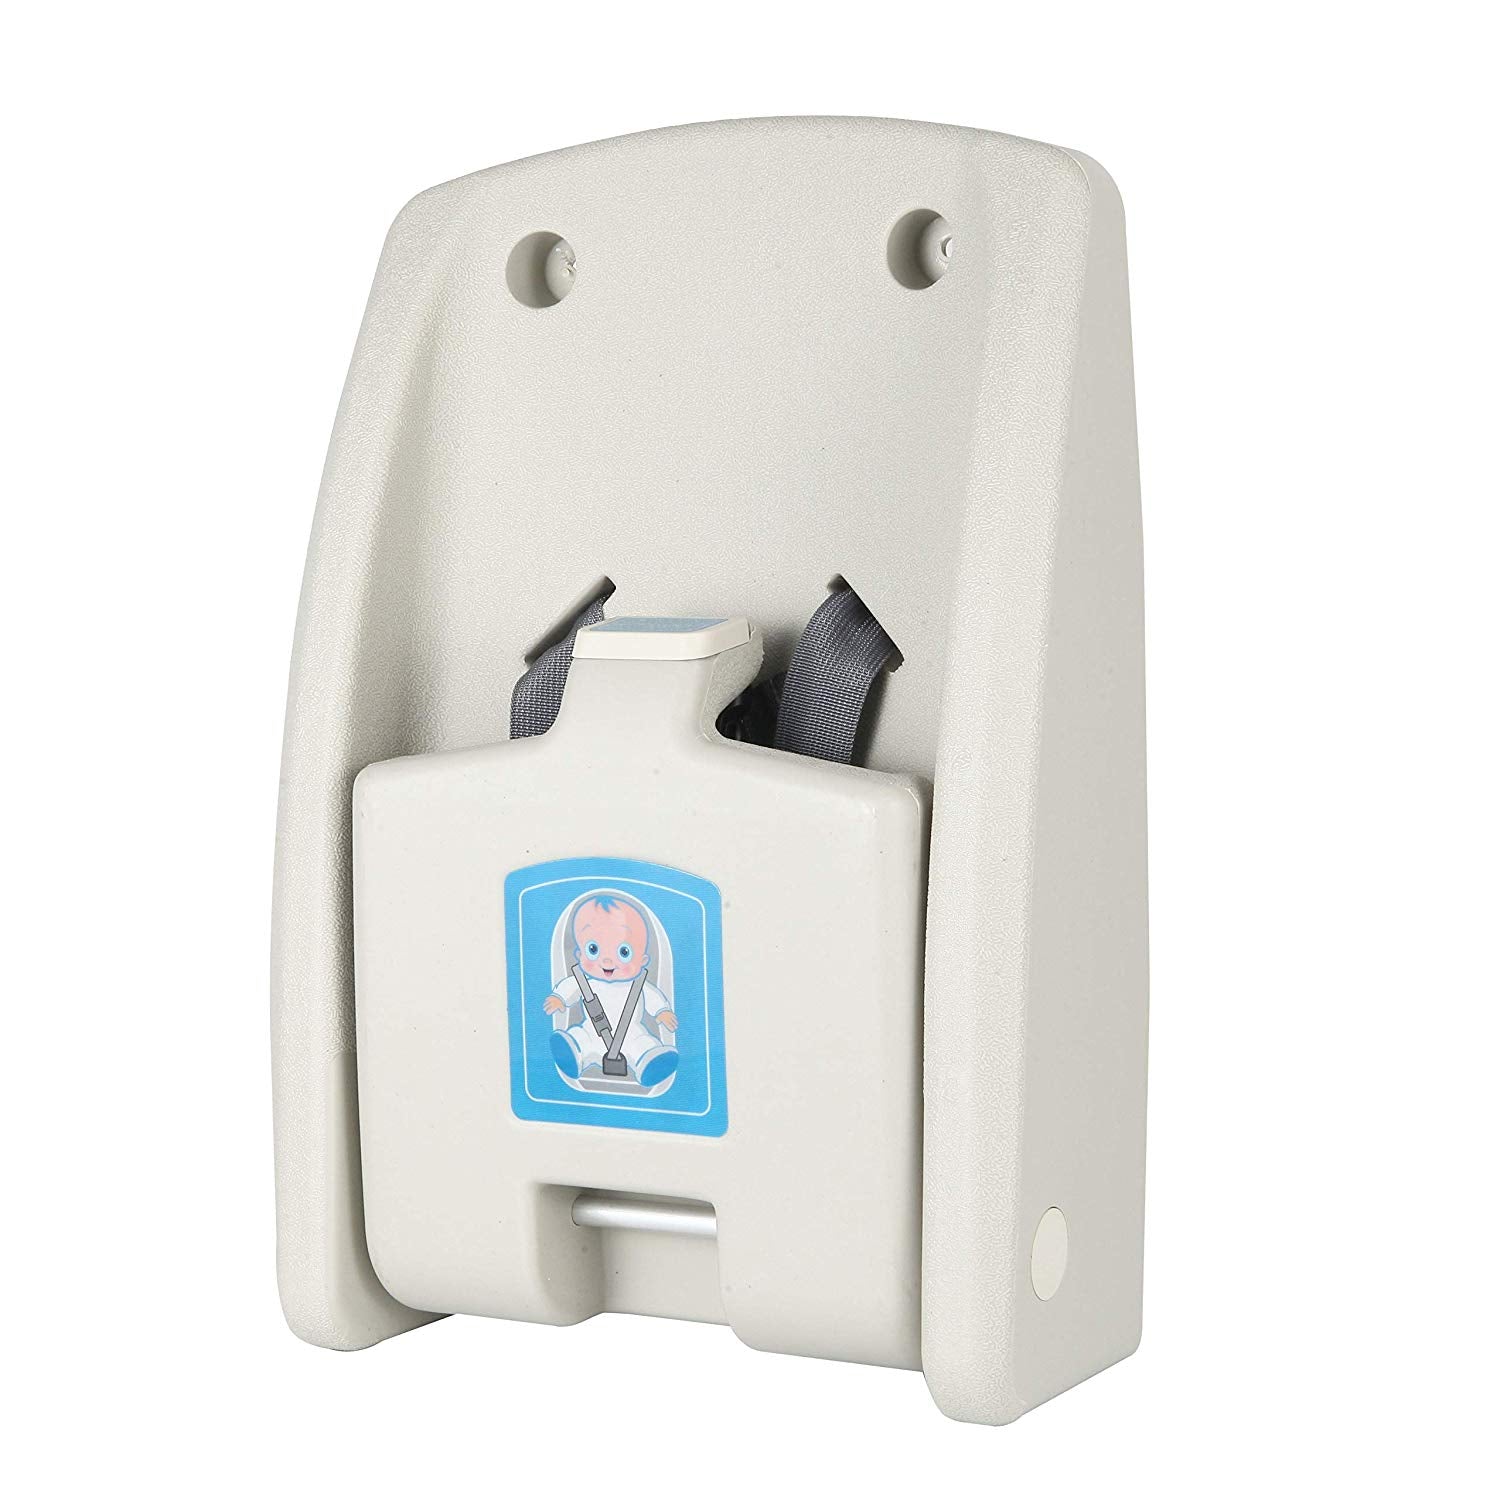 WIsewater - Wall Mounted Child Protection Safety seat